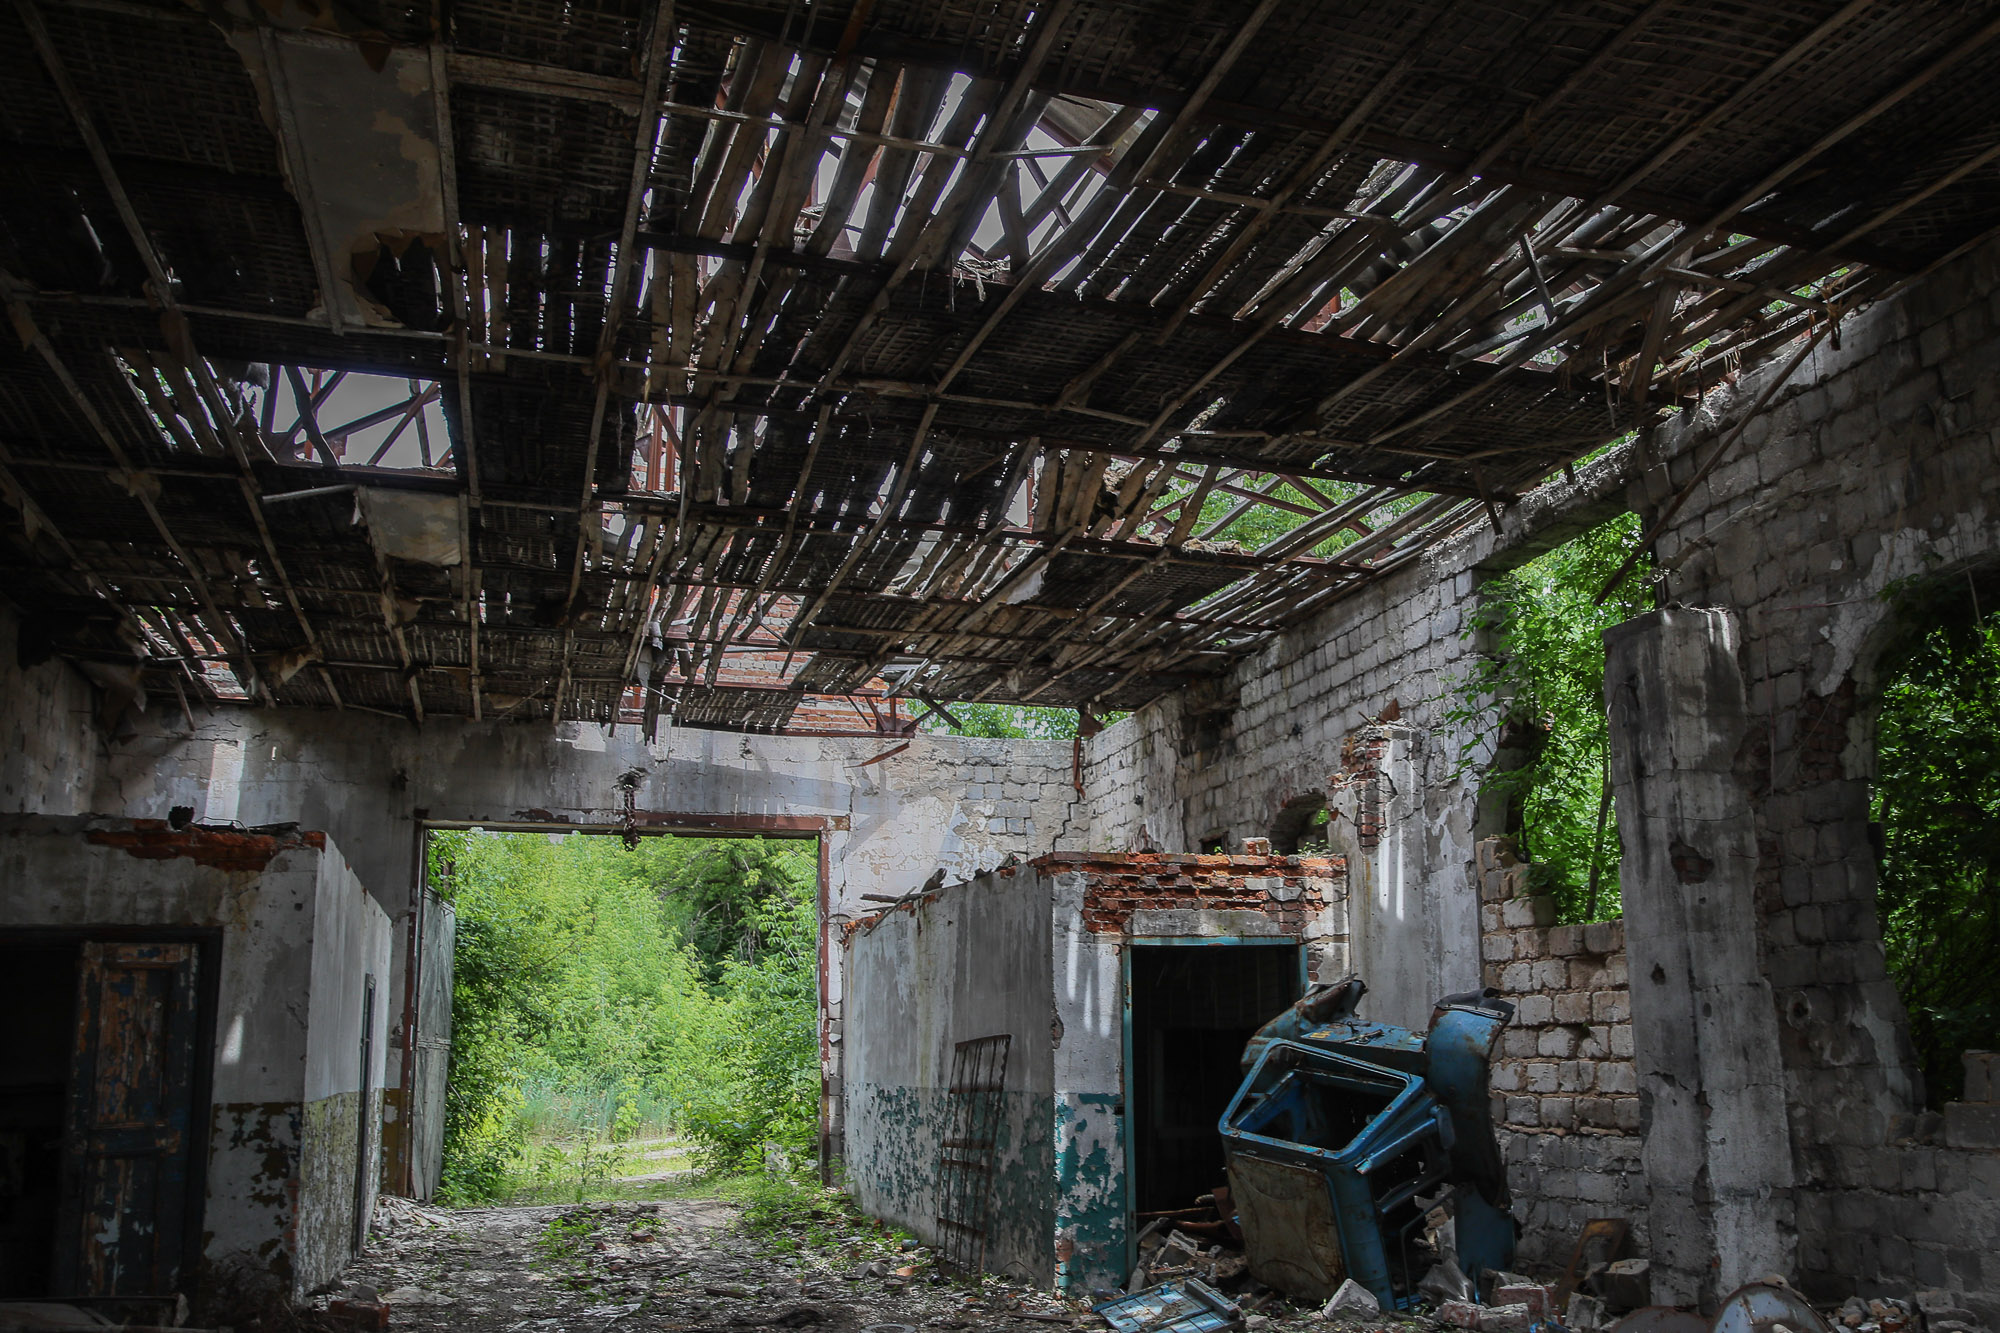 Ruins of an agricultural manufacture building destroyed in shelling, pictured in the town of Opytne, eastern Ukraine, on June 12, 2019.